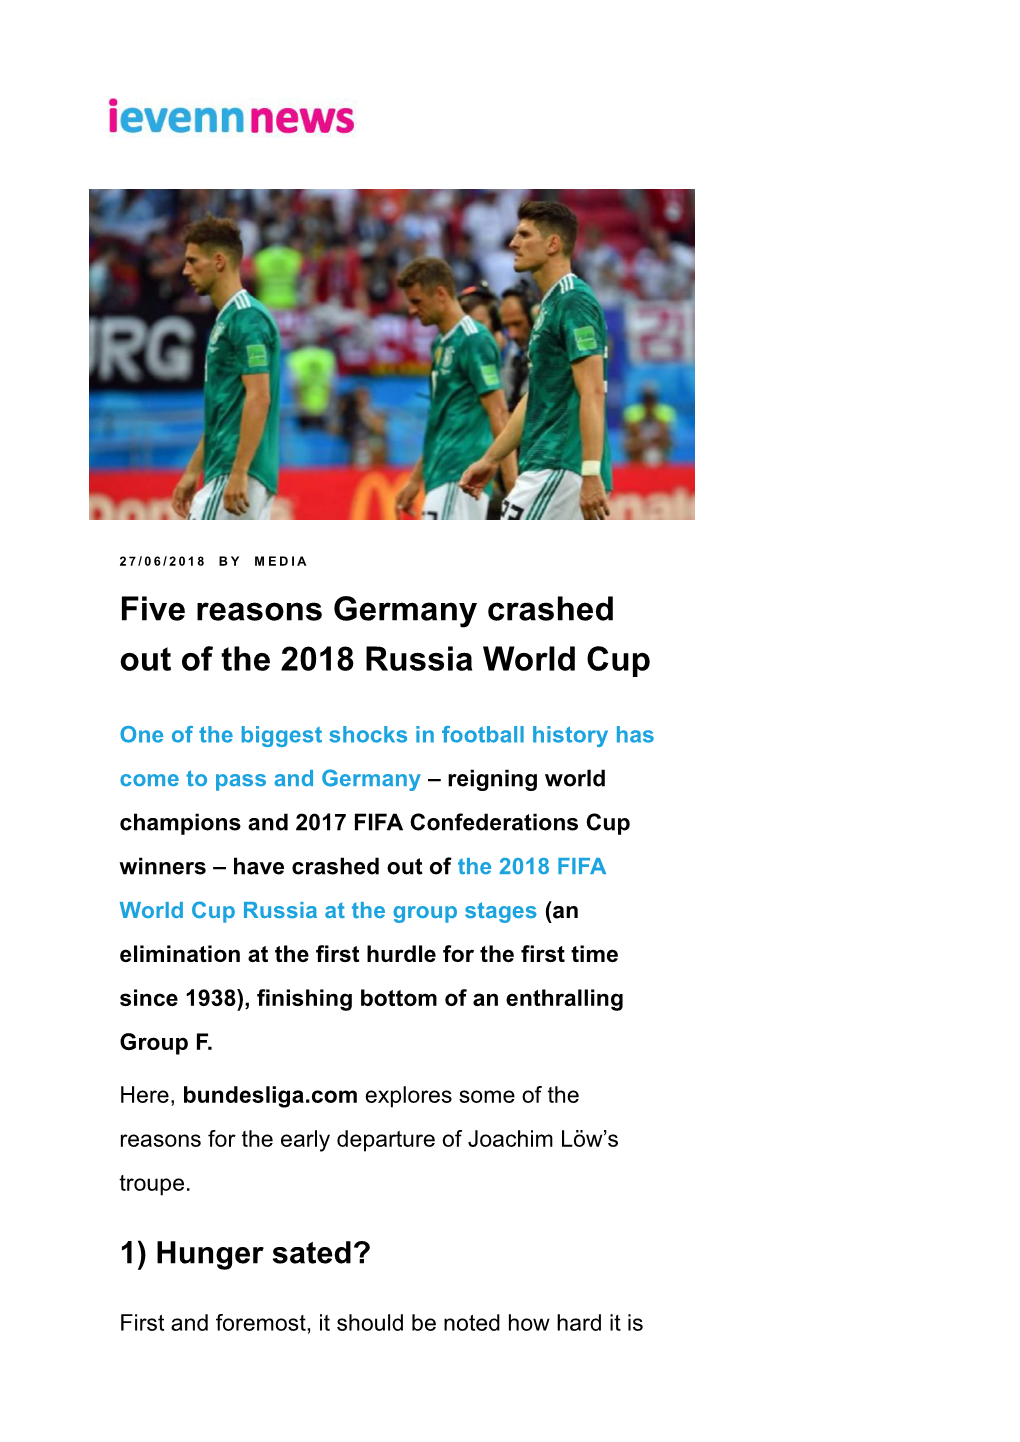 Five Reasons Germany Crashed out of the 2018 Russia World Cup